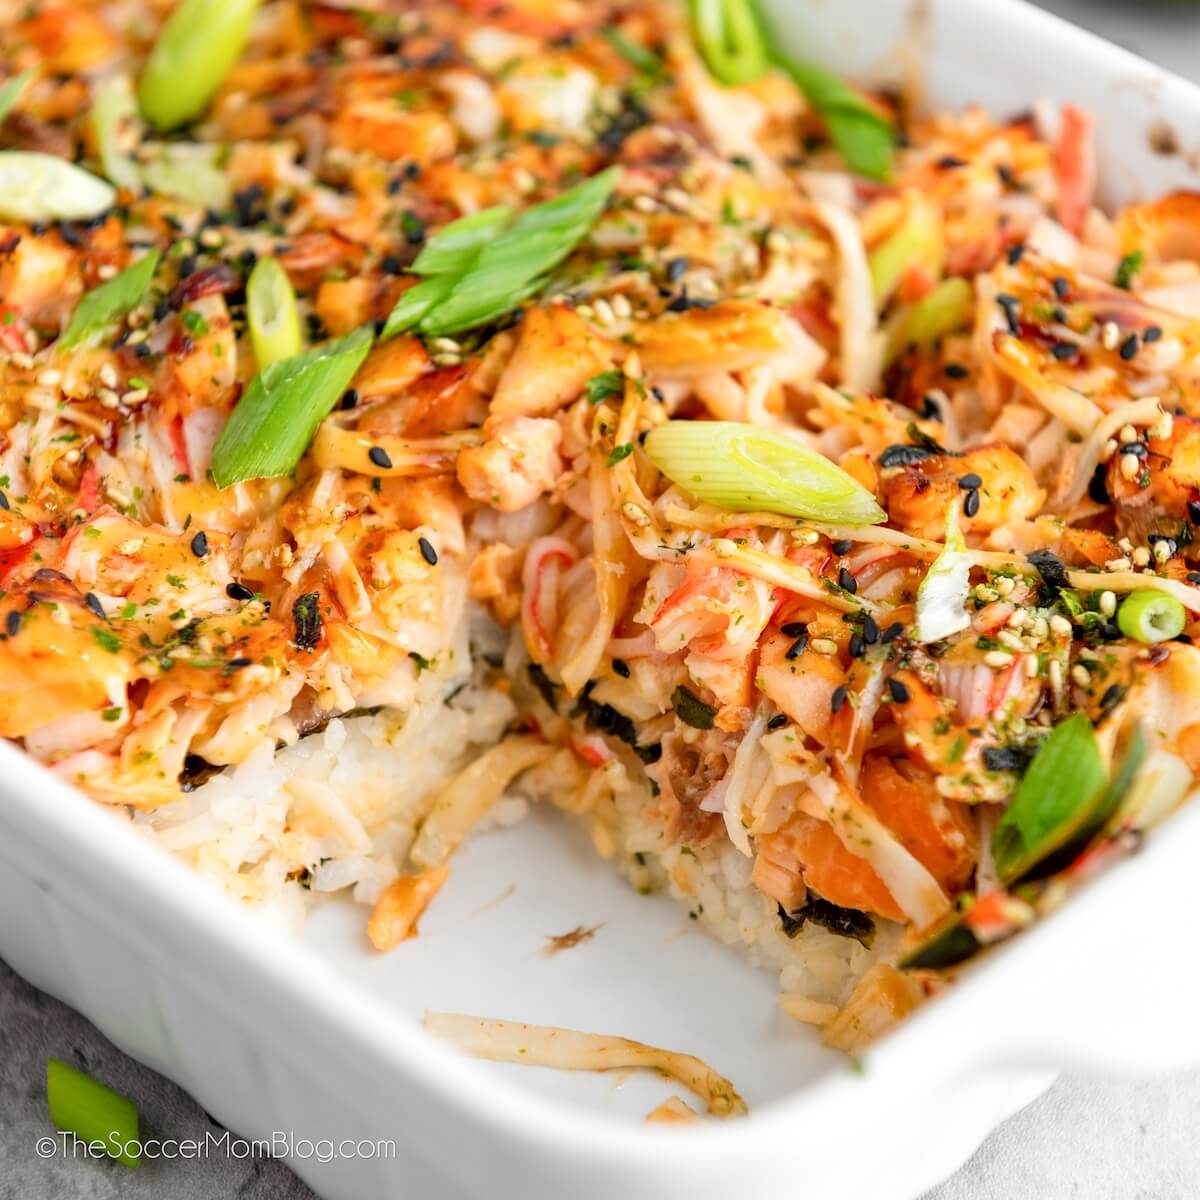 Salmon Sushi Bake, close up, to show detail of the layers of rice, salmon, and toppings